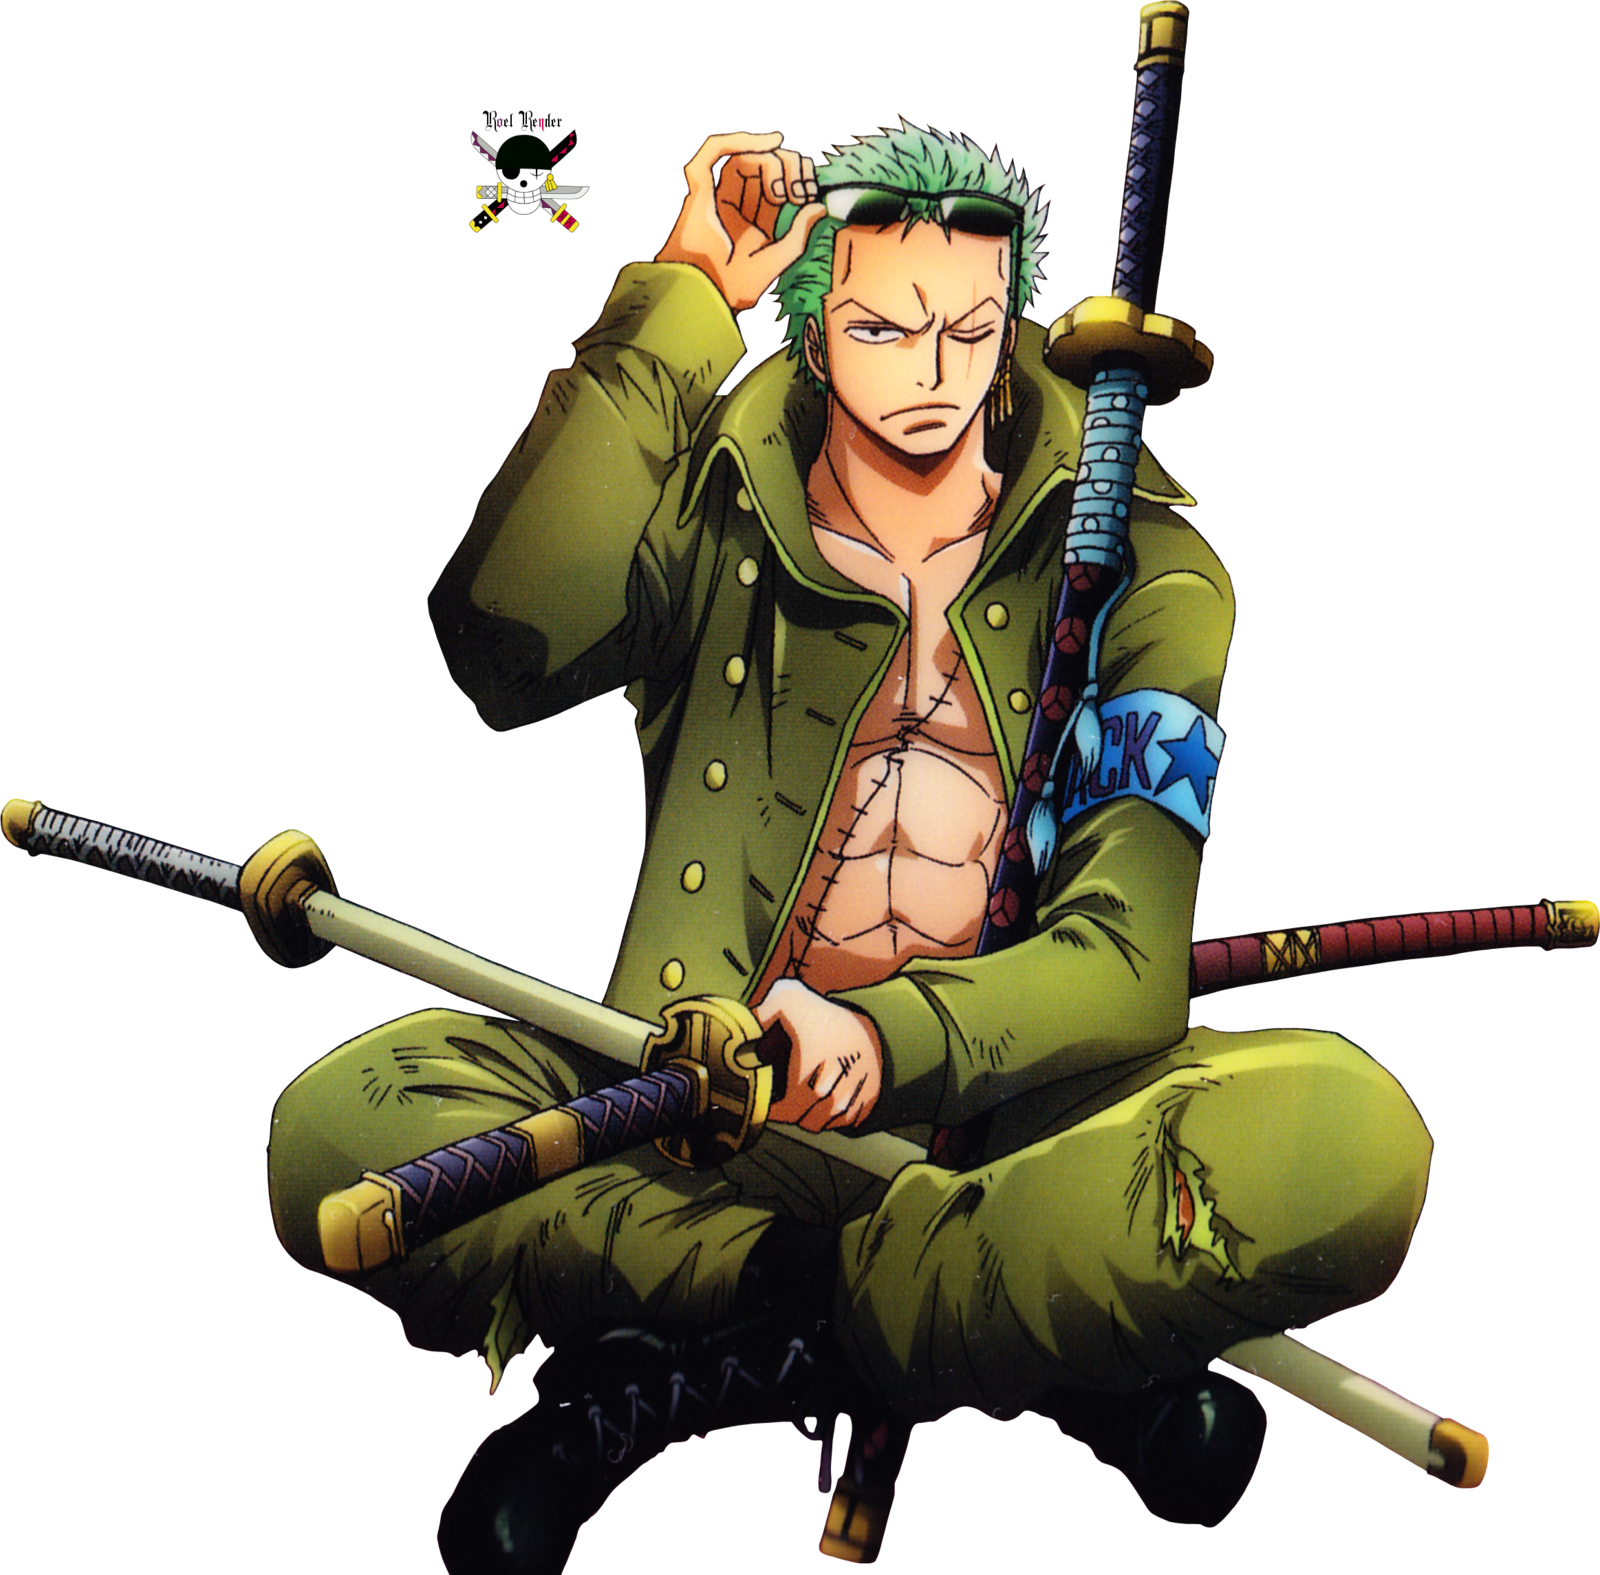 Download One Piece Zoro Transparent Background HQ PNG Image FreePNGImg.